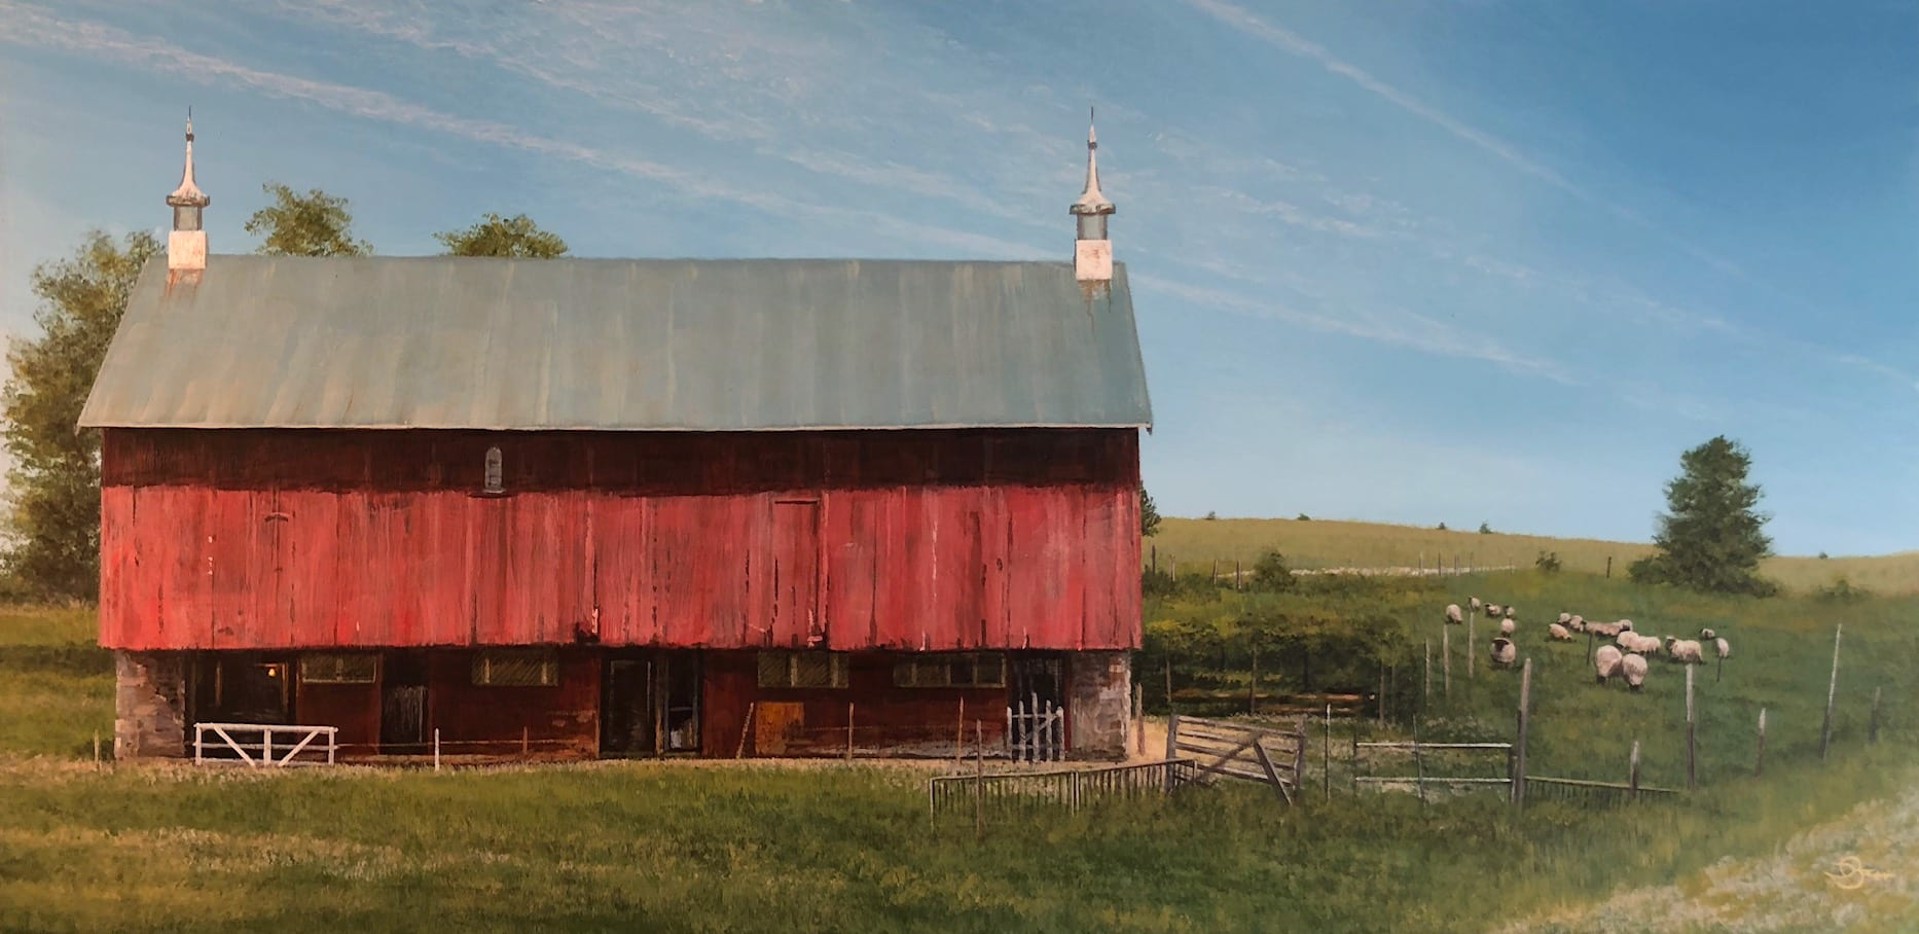 Out to Pasture by Del-Bourree Bach